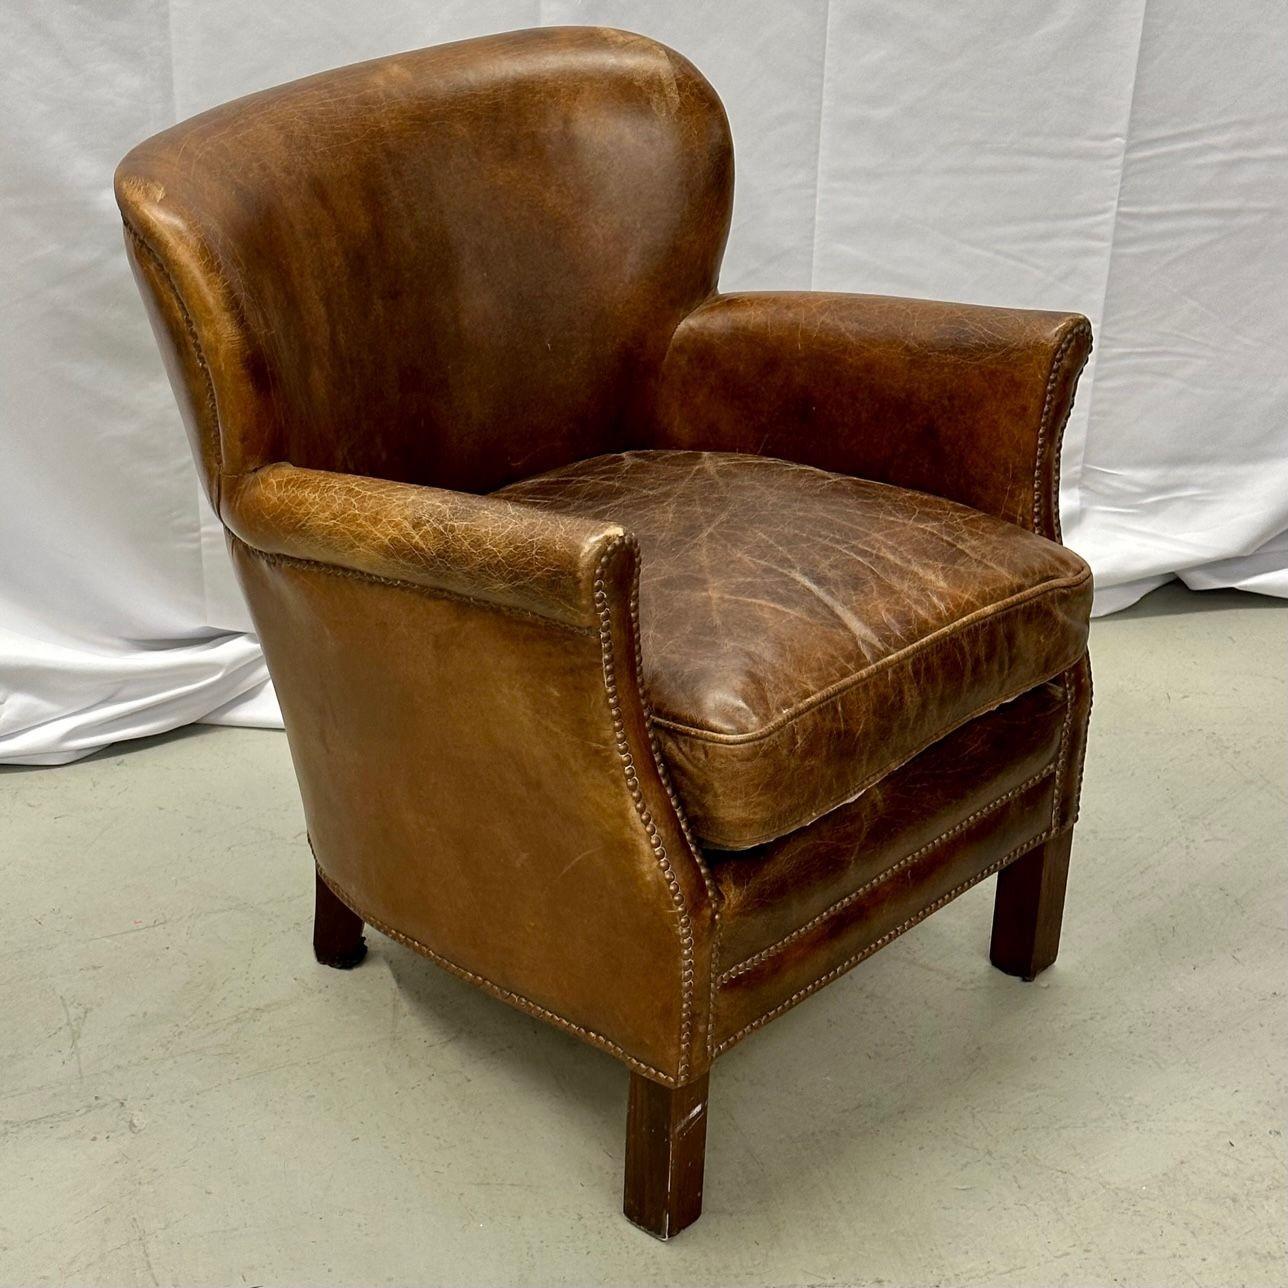 Pair of Petite Distressed Leather Club / Lounge / Arm Chairs, Danish Style 1